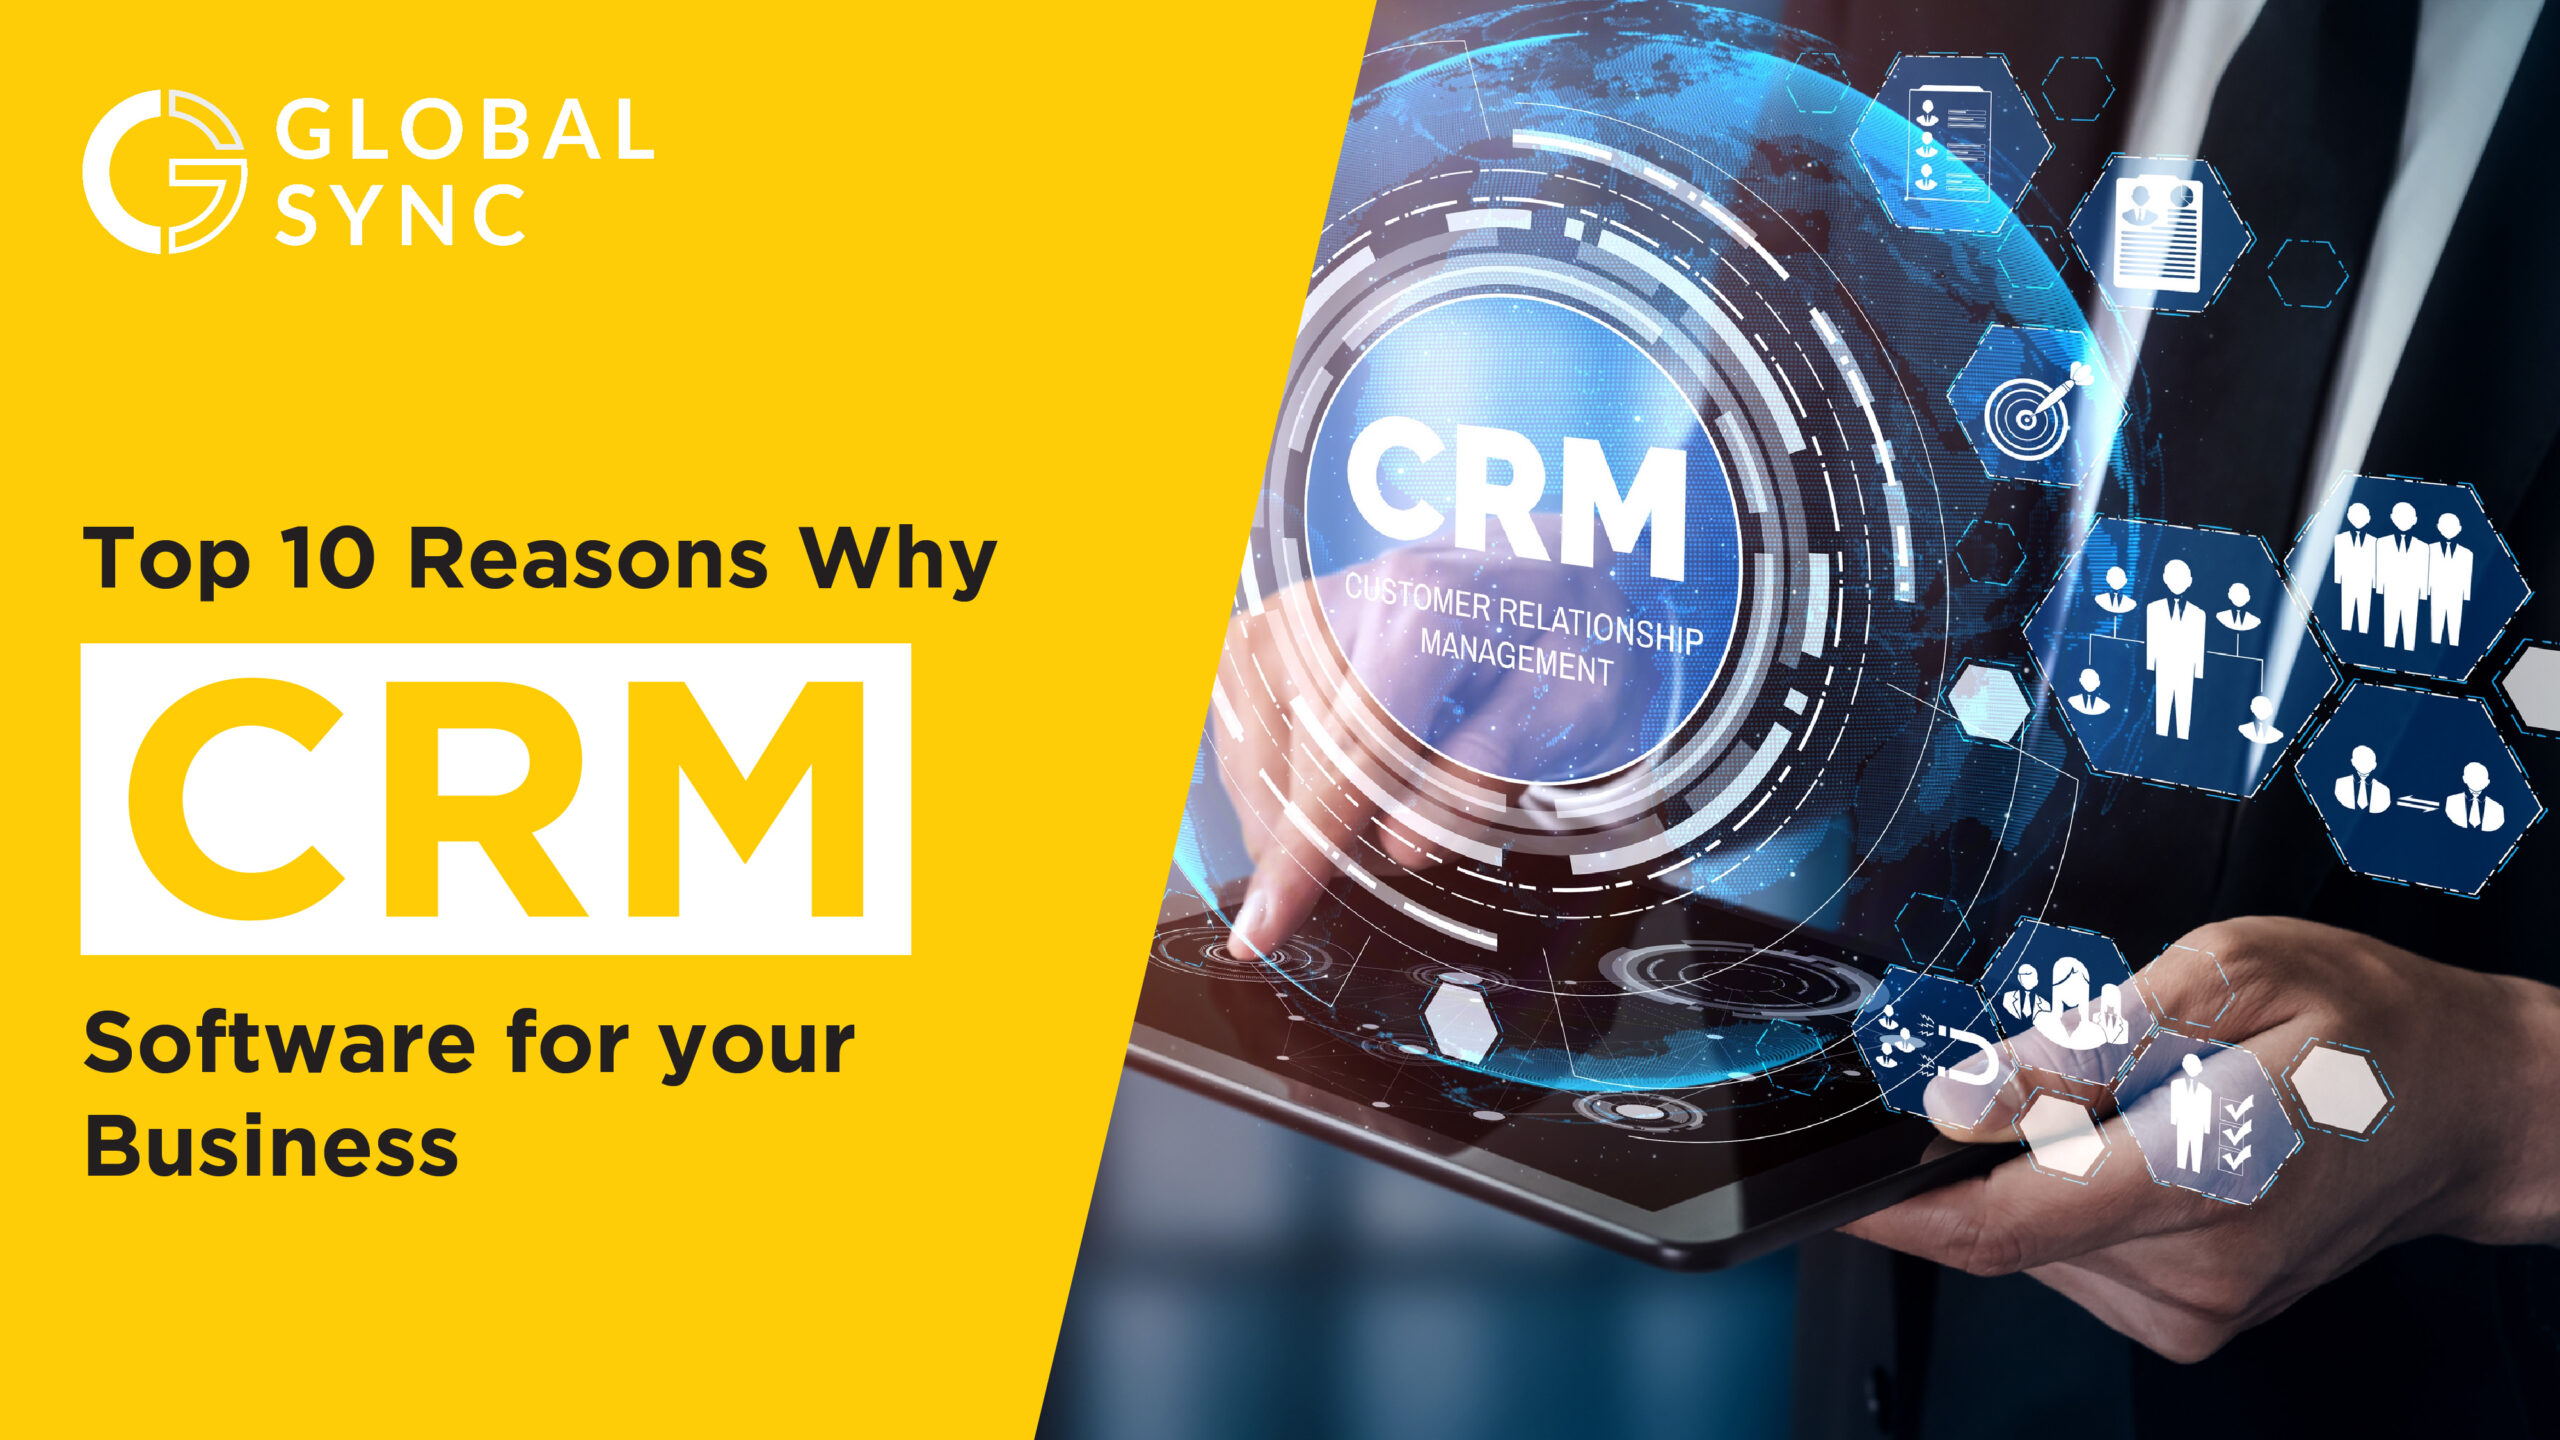 Top 10 Reason Why Choose CRM Software for Your Business